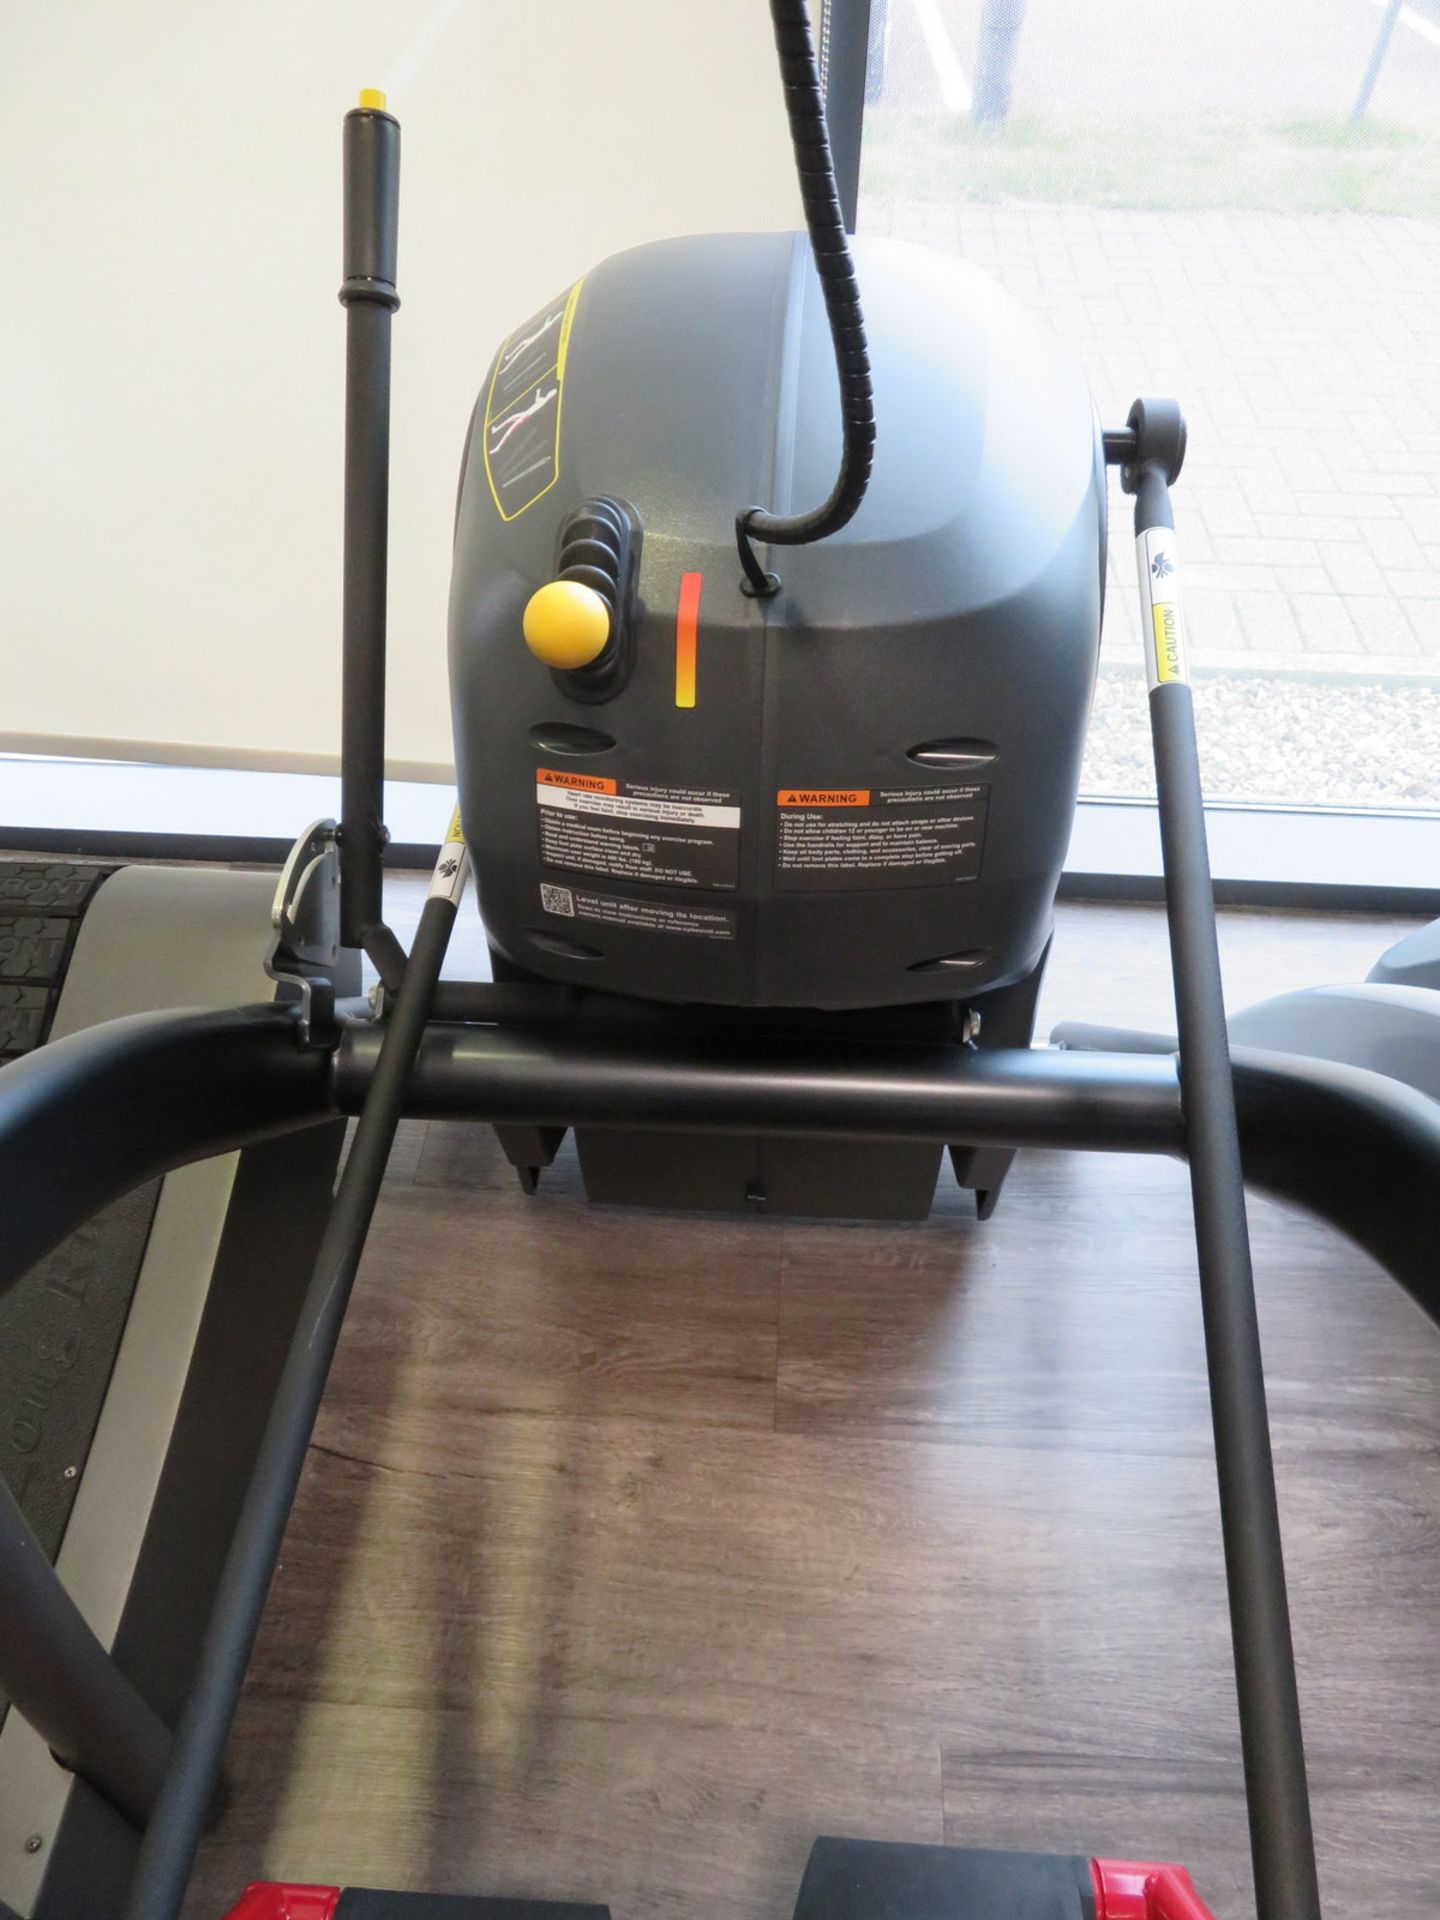 Cybex SP ARC High Intensity Trainer. Digital Display. Good Working Condition. - Image 5 of 9